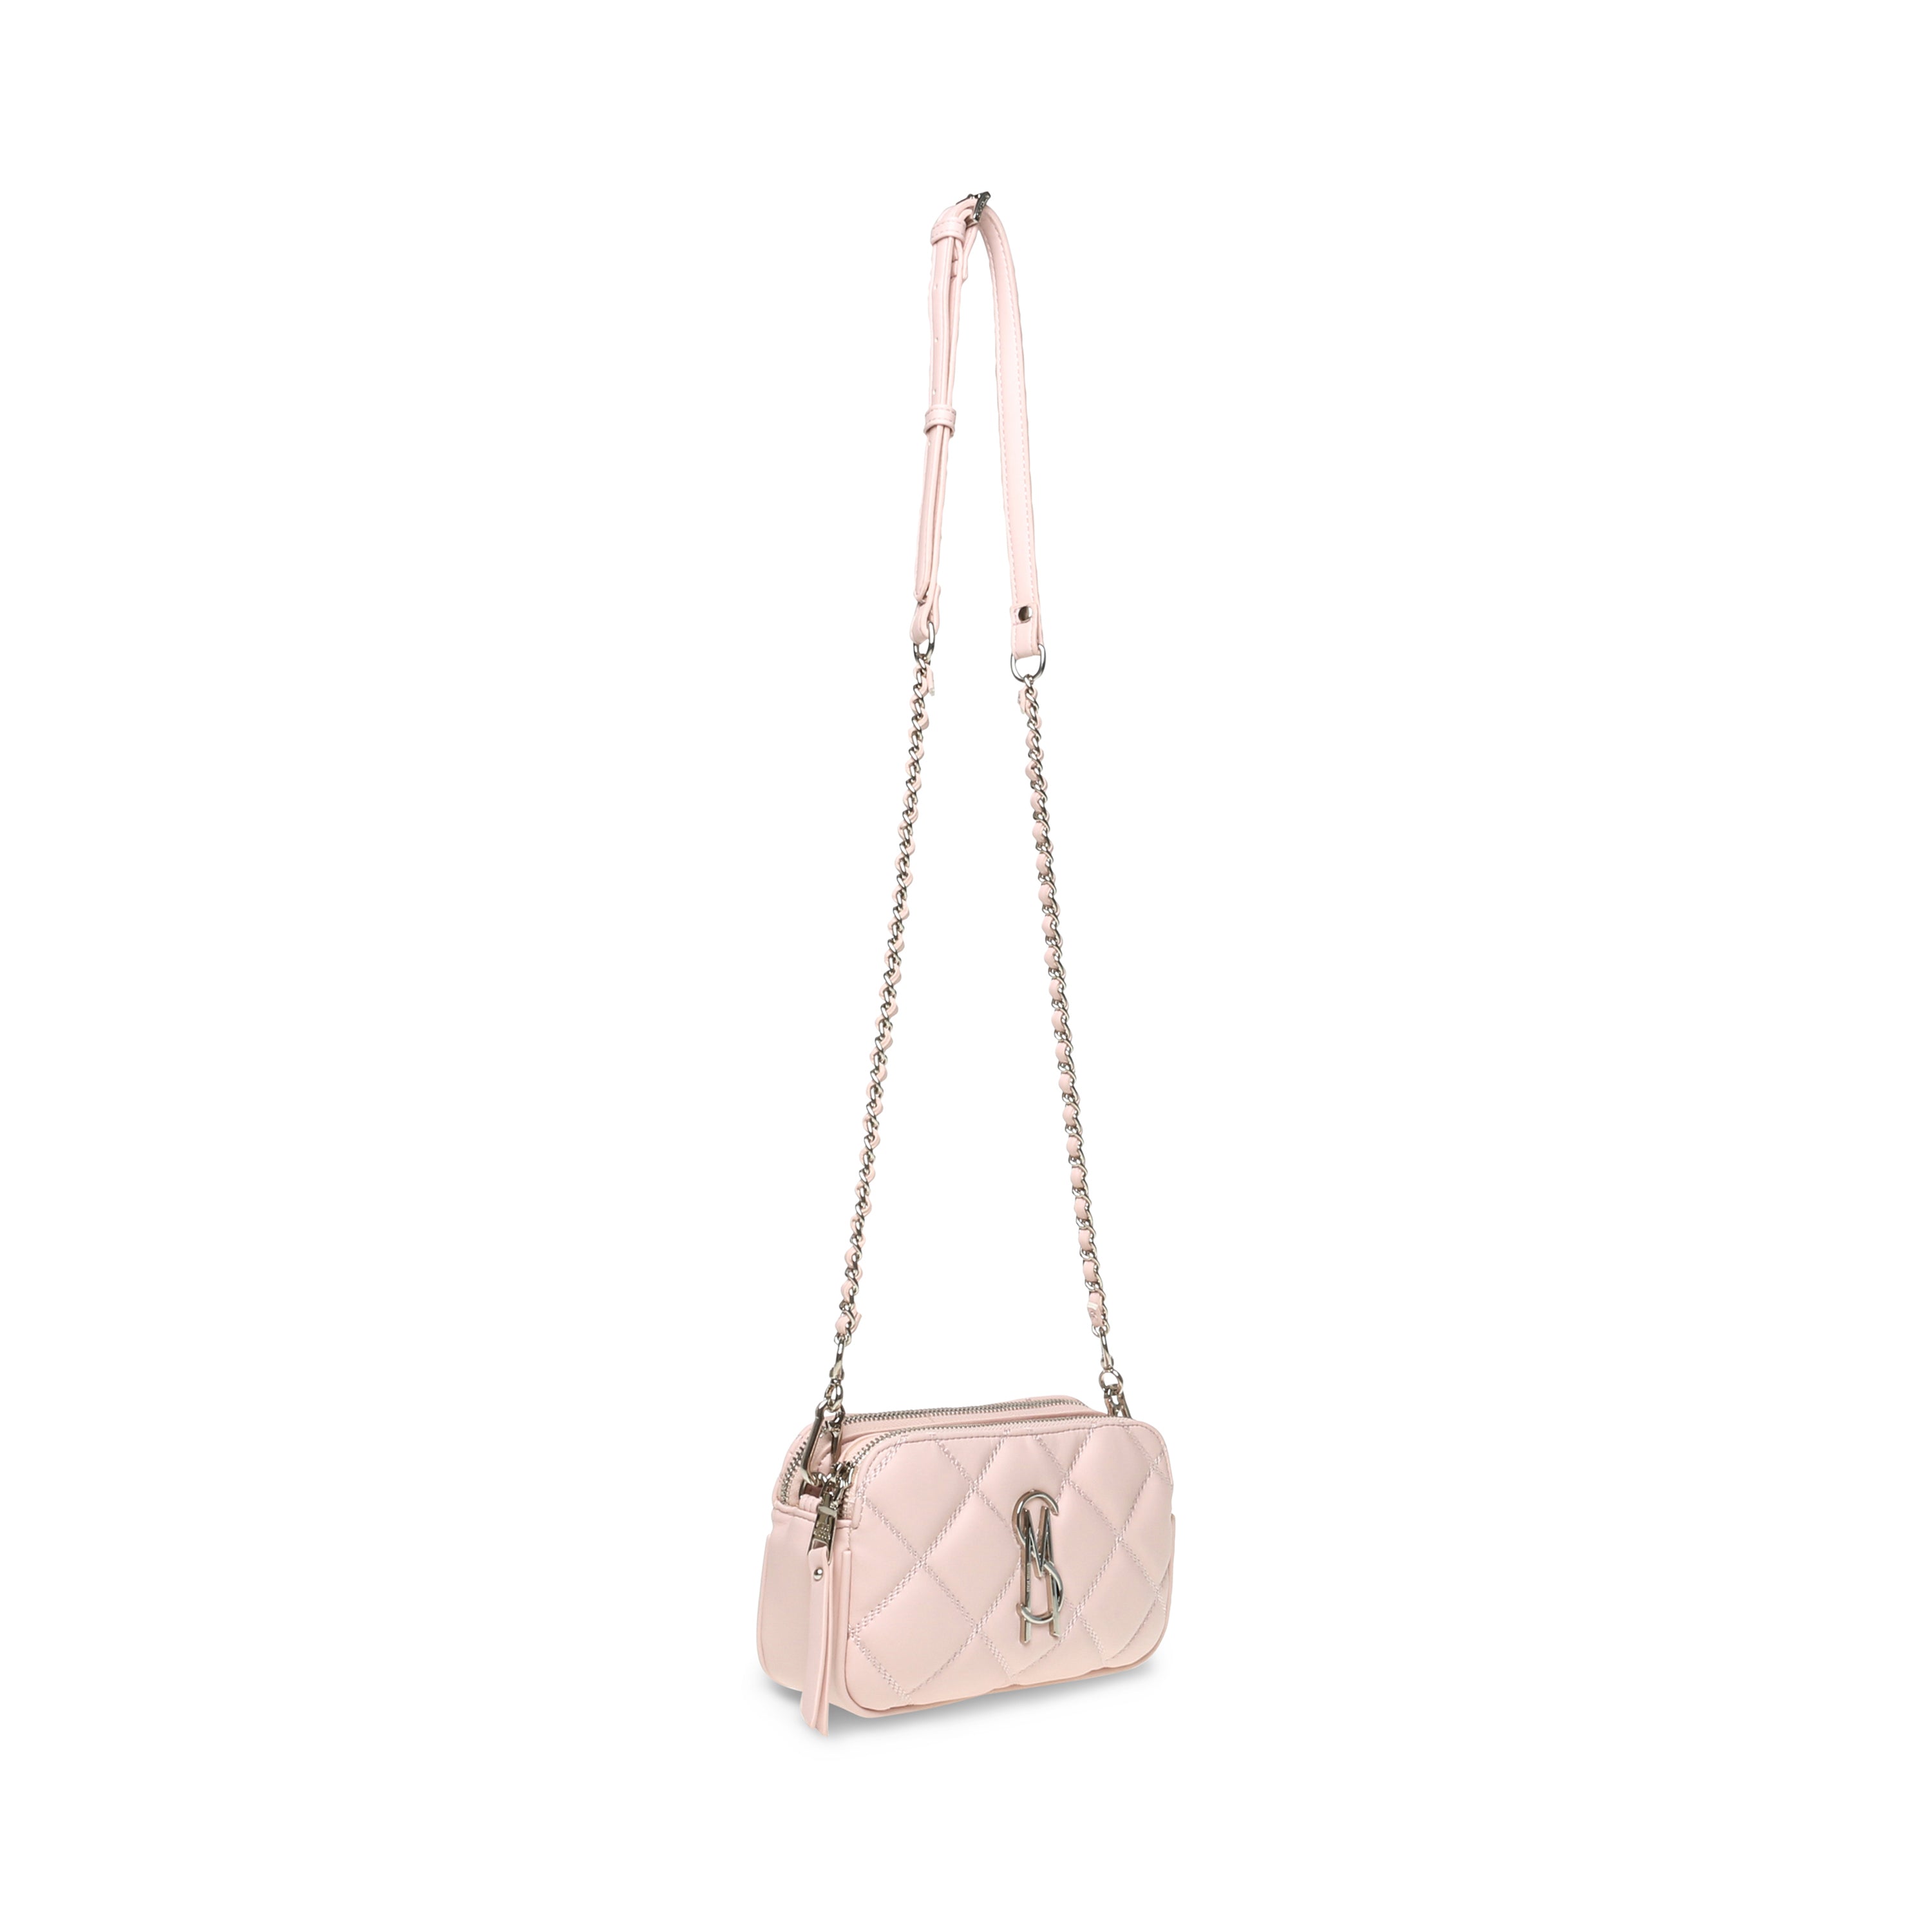 BMARVIS LIGHT PINK CROSSBODY BAG- Hover Image